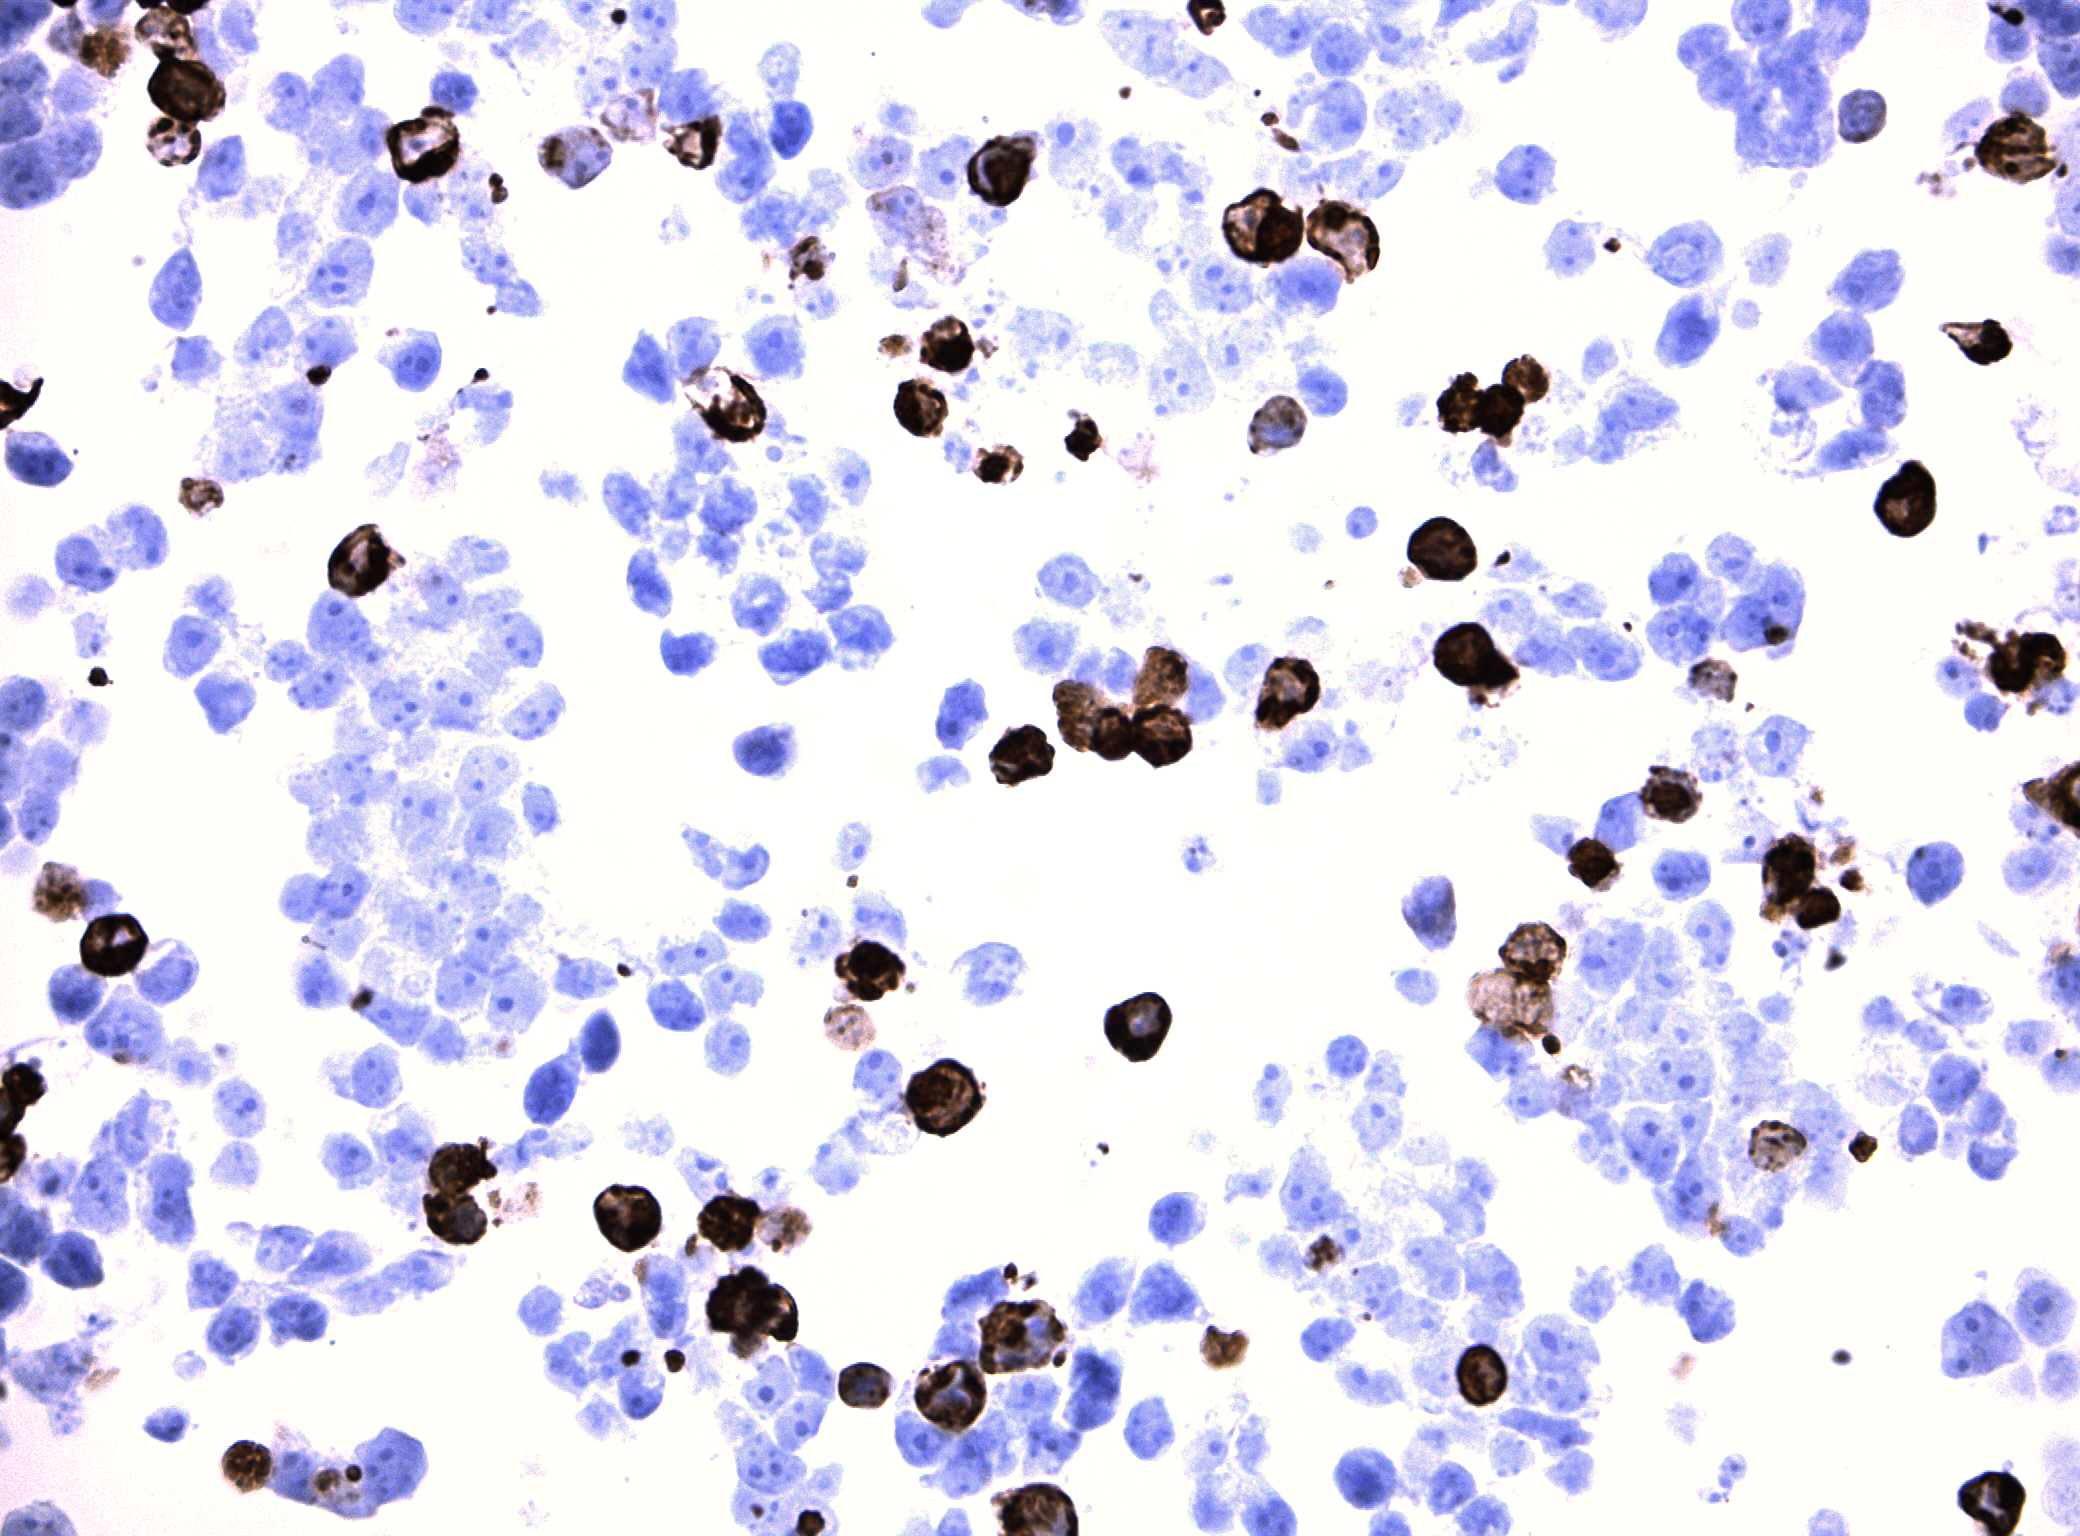 Immunohistology staining on OR2T35 overexpressed cytosection TS424248P5 with mouse anti DDK clone OTI11C3 C/N TA180144 at 1:400 dilution 4C O/N. Antibody staining was achieved with HIER Citrate pH6 , Polink1 with DAB chromogen detection kit (D11-18). Positive stain shown with the brown chromogen present. HEK293T cells were transfected with cDNA clone RC424248, 5 micron sections, 40x magnification